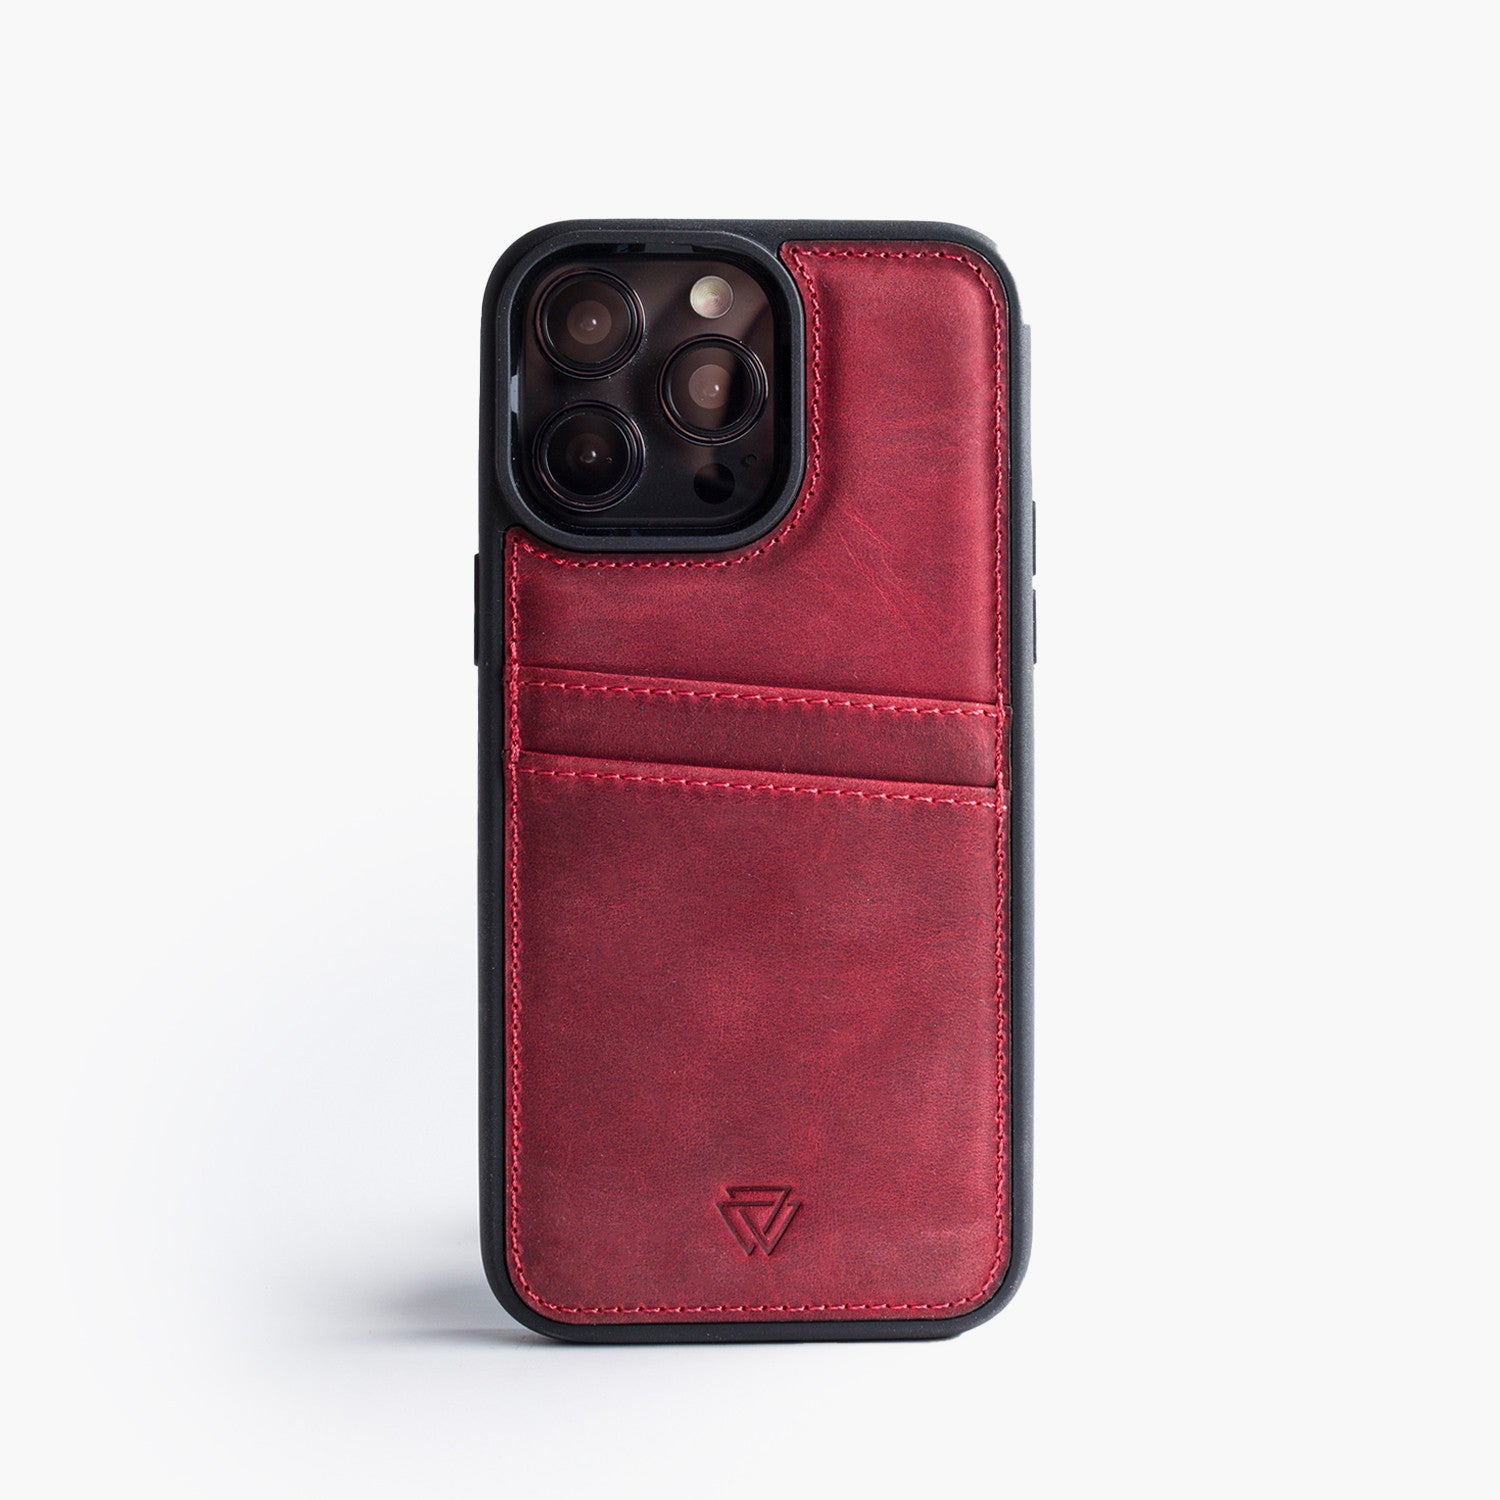 Wachikopa leather Back Cover C.C. Case for iPhone 12 Pro Max Red